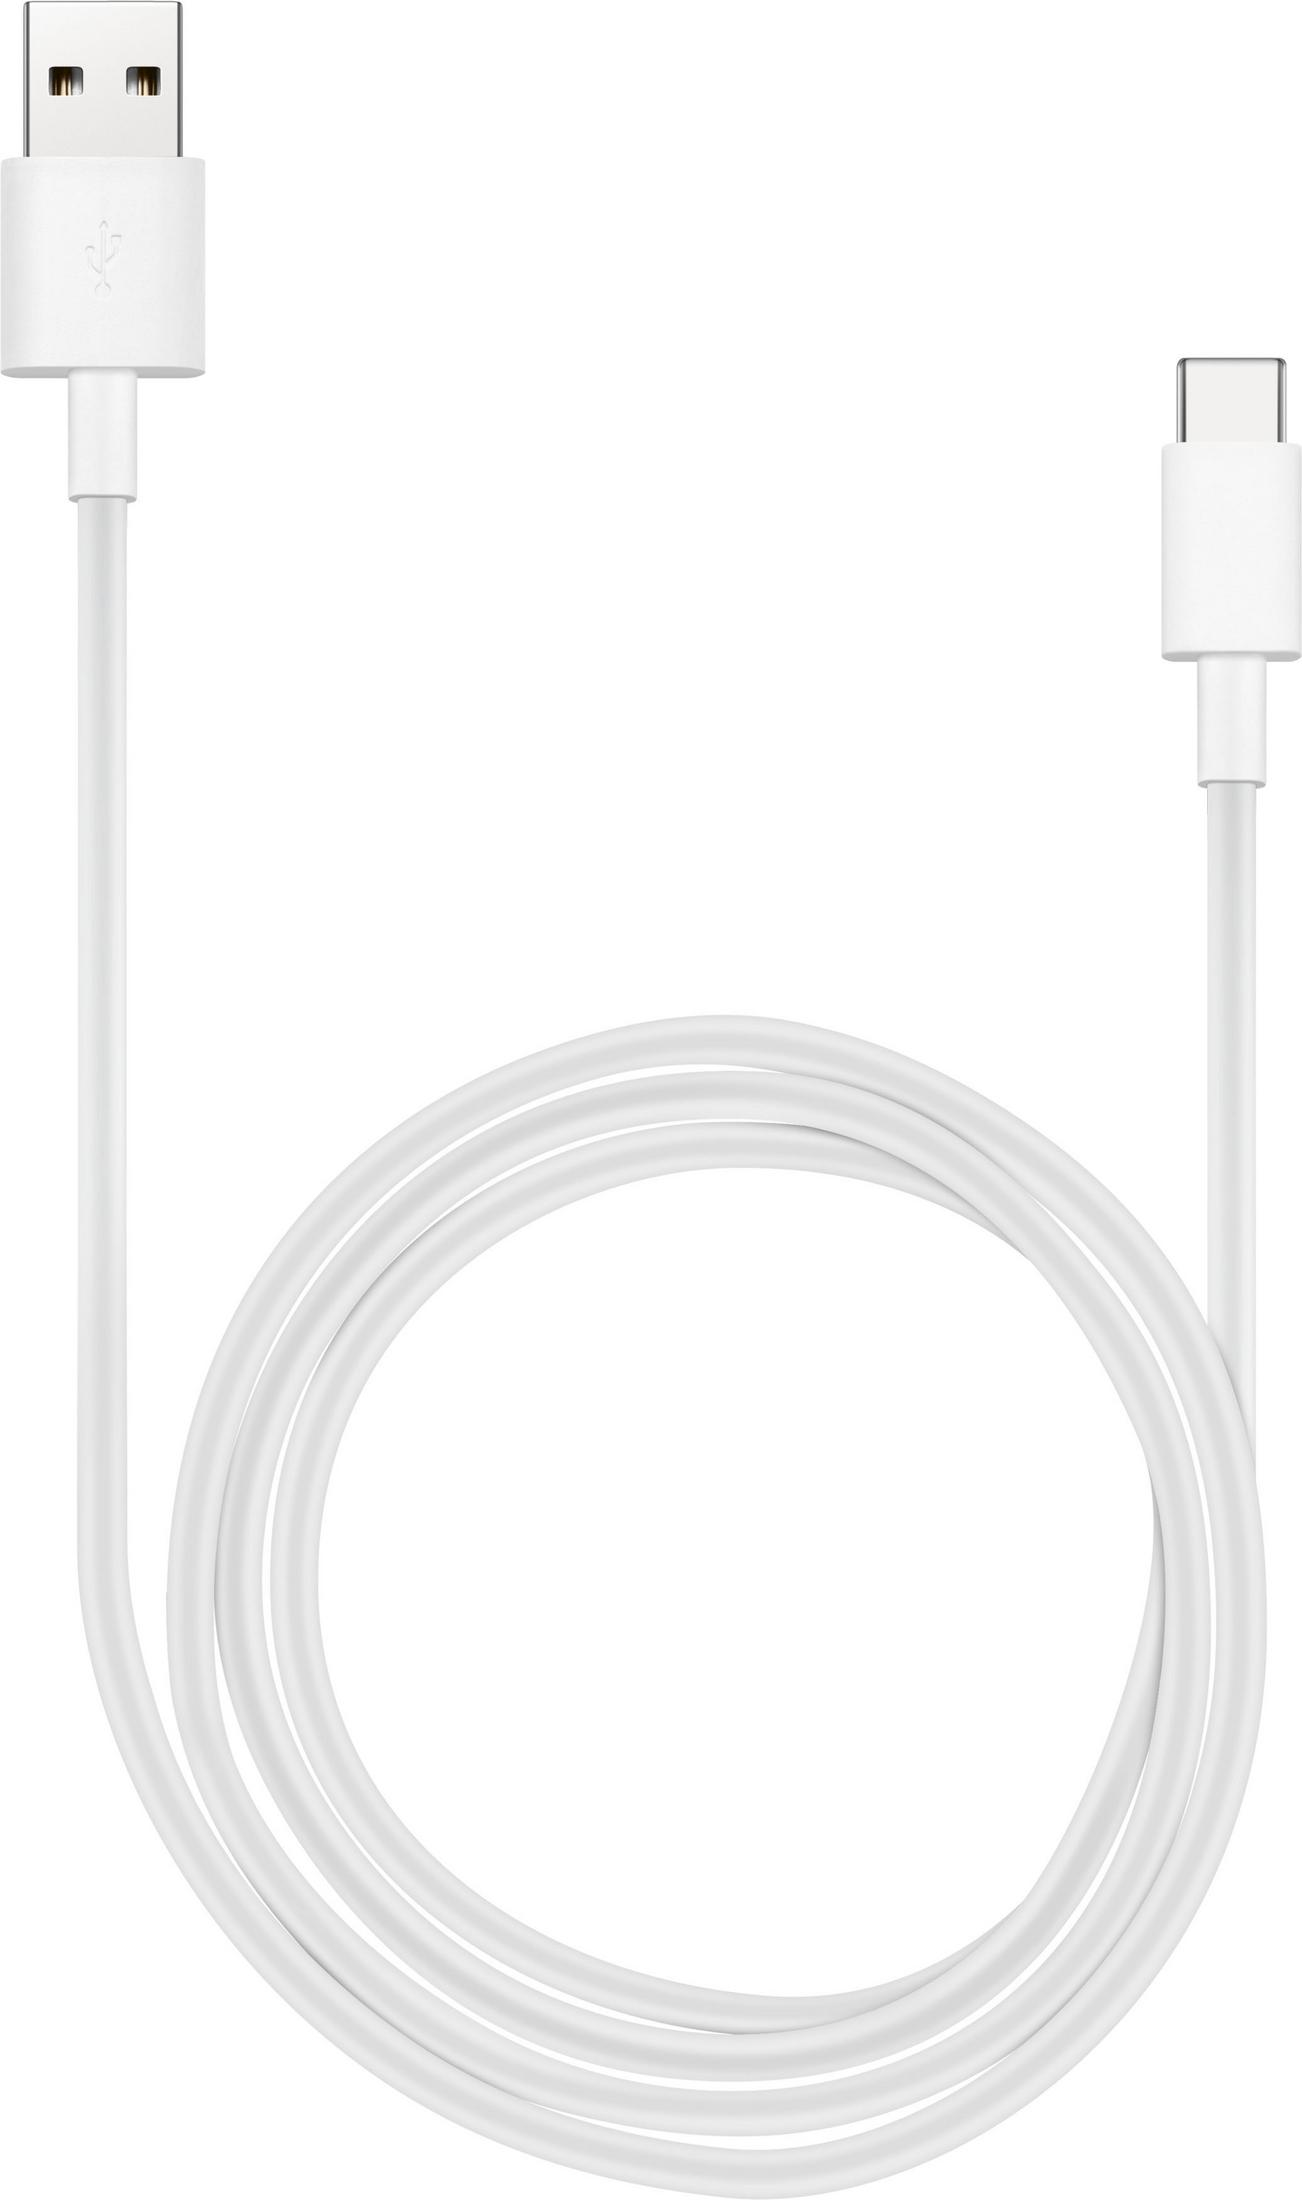 HUAWEI 190037 USB CHARGER AP32 Weiß Ladegerät CABLE 100 240 Universal, - Volt, USB-C